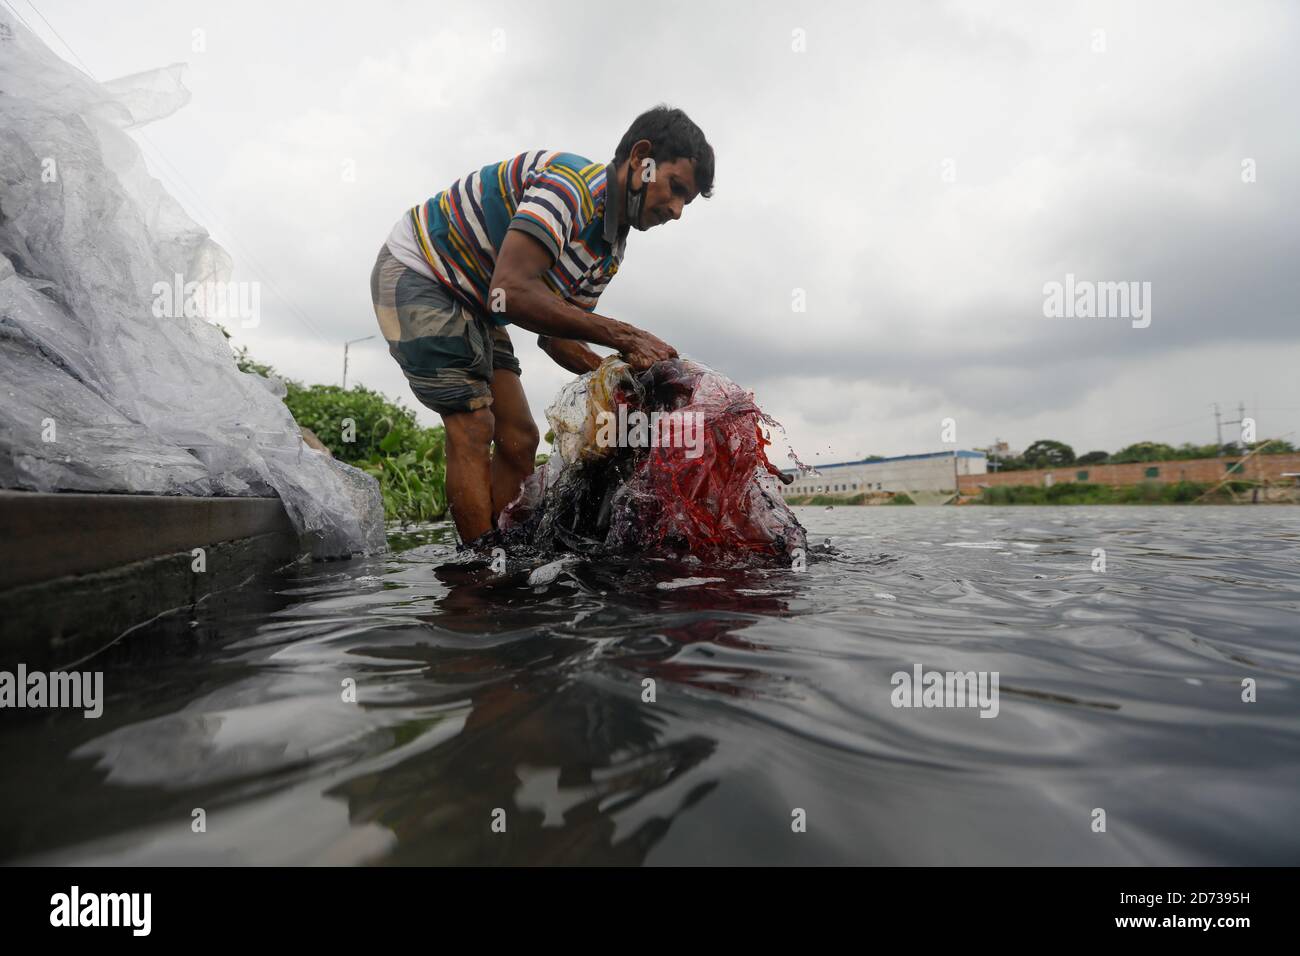 A Bangladeshi man washes plastic waste, which were used to carry chemicals, in the water of the Turag River before recycling it, in Tongi, near Dhaka, Stock Photo